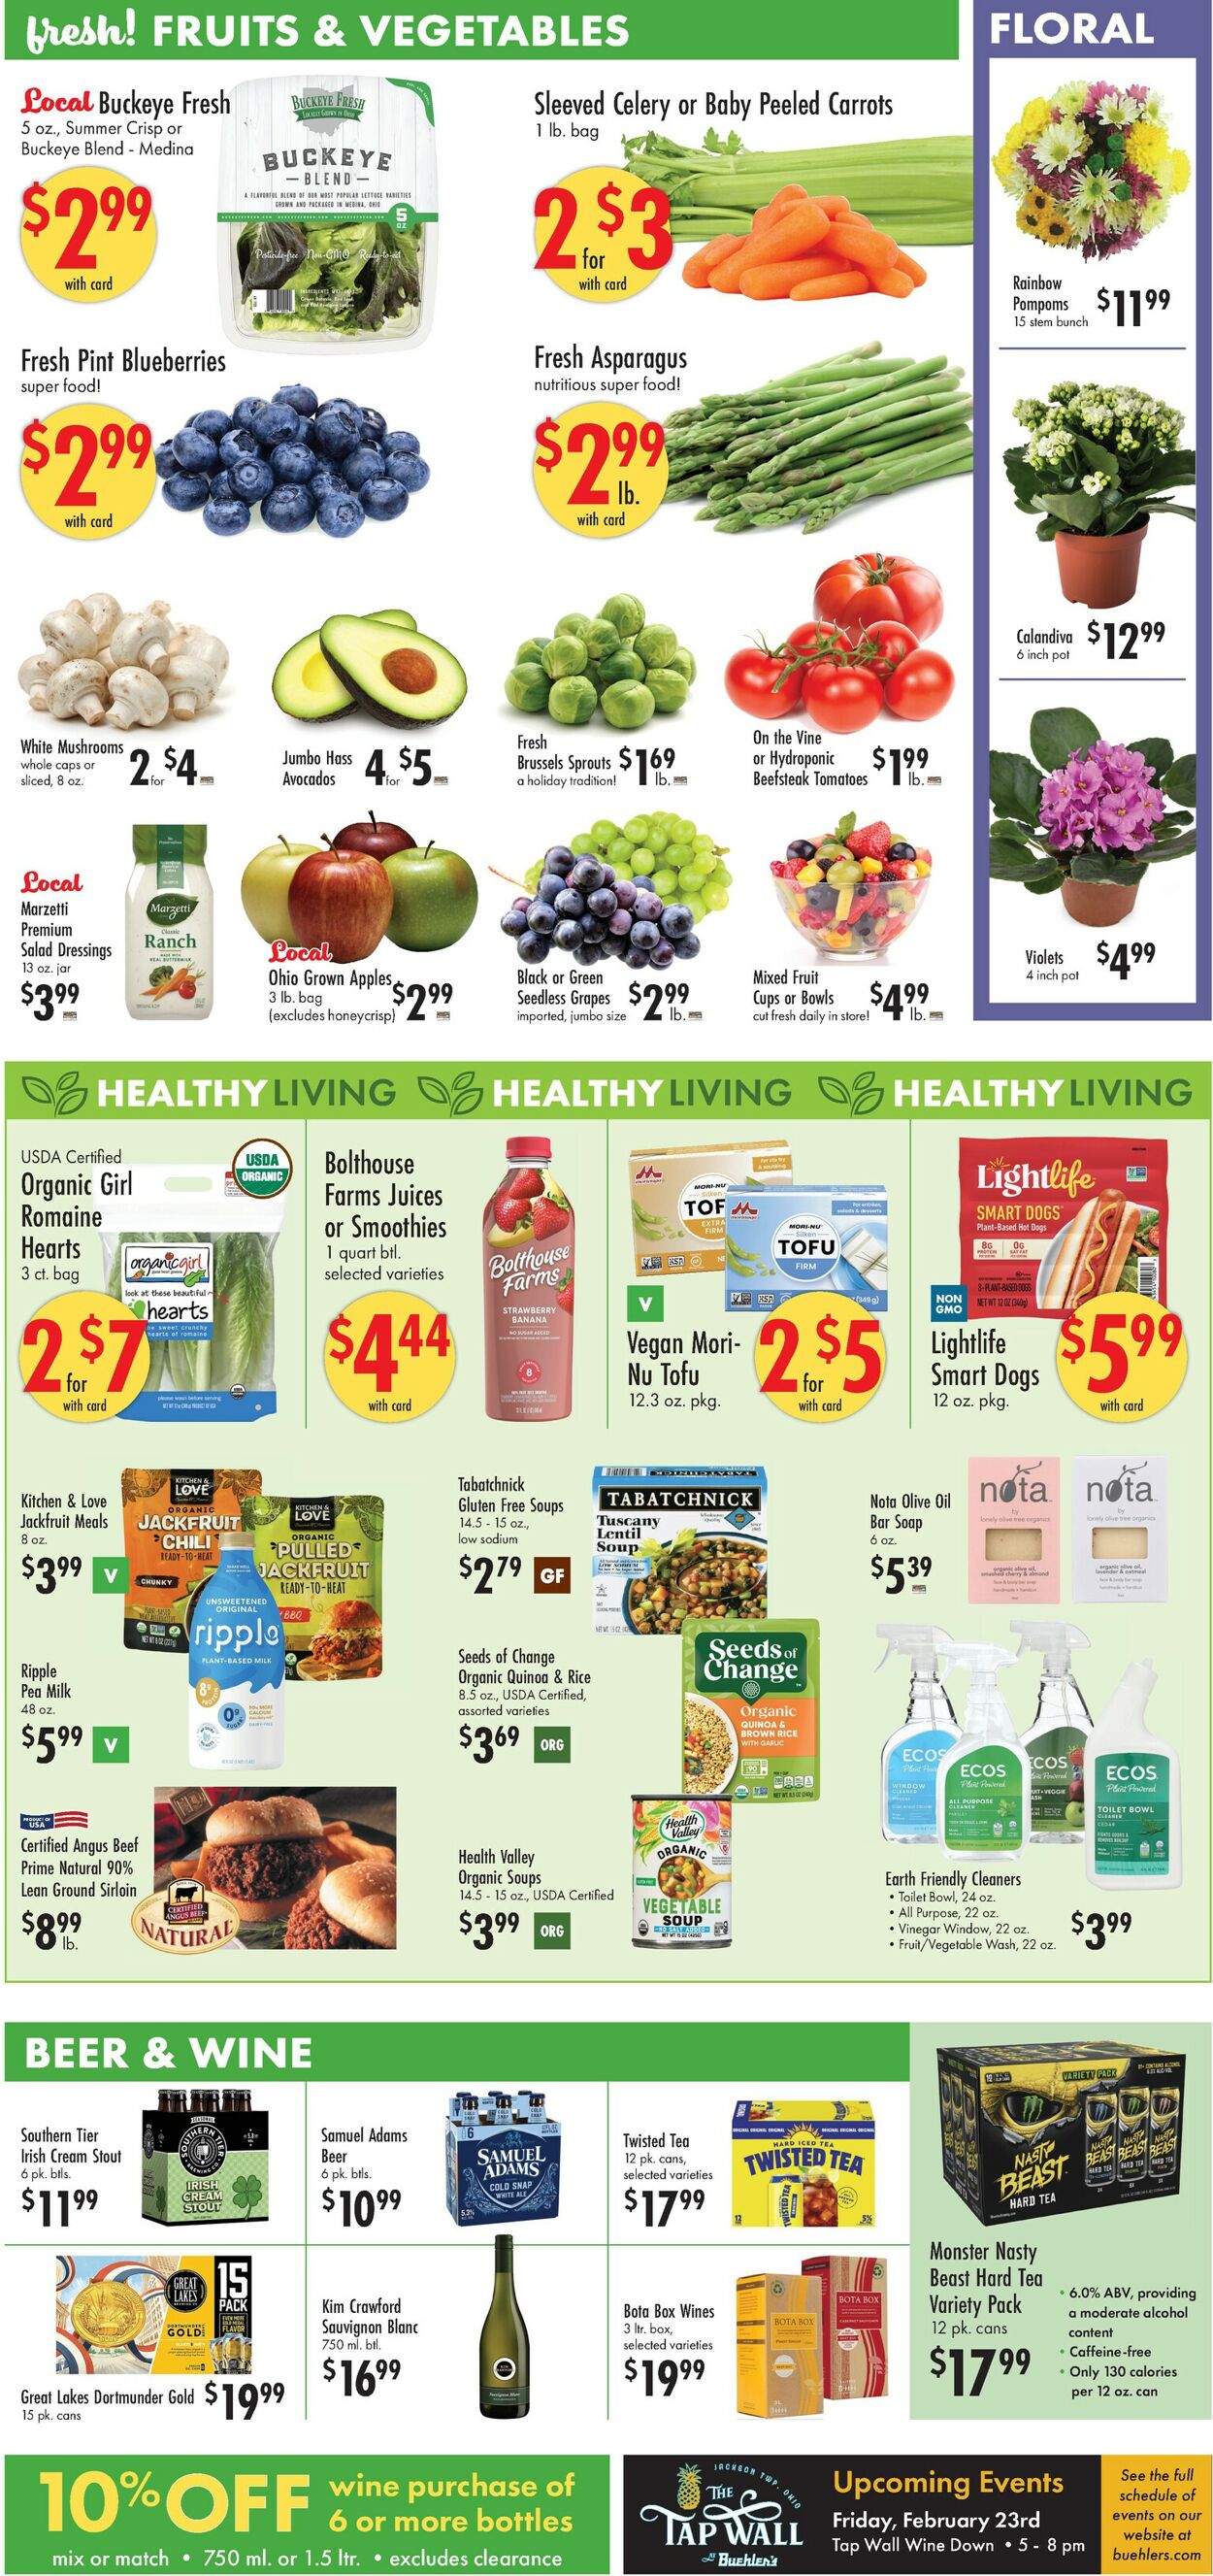 Catalogue Buehler's Fresh Foods from 02/21/2024